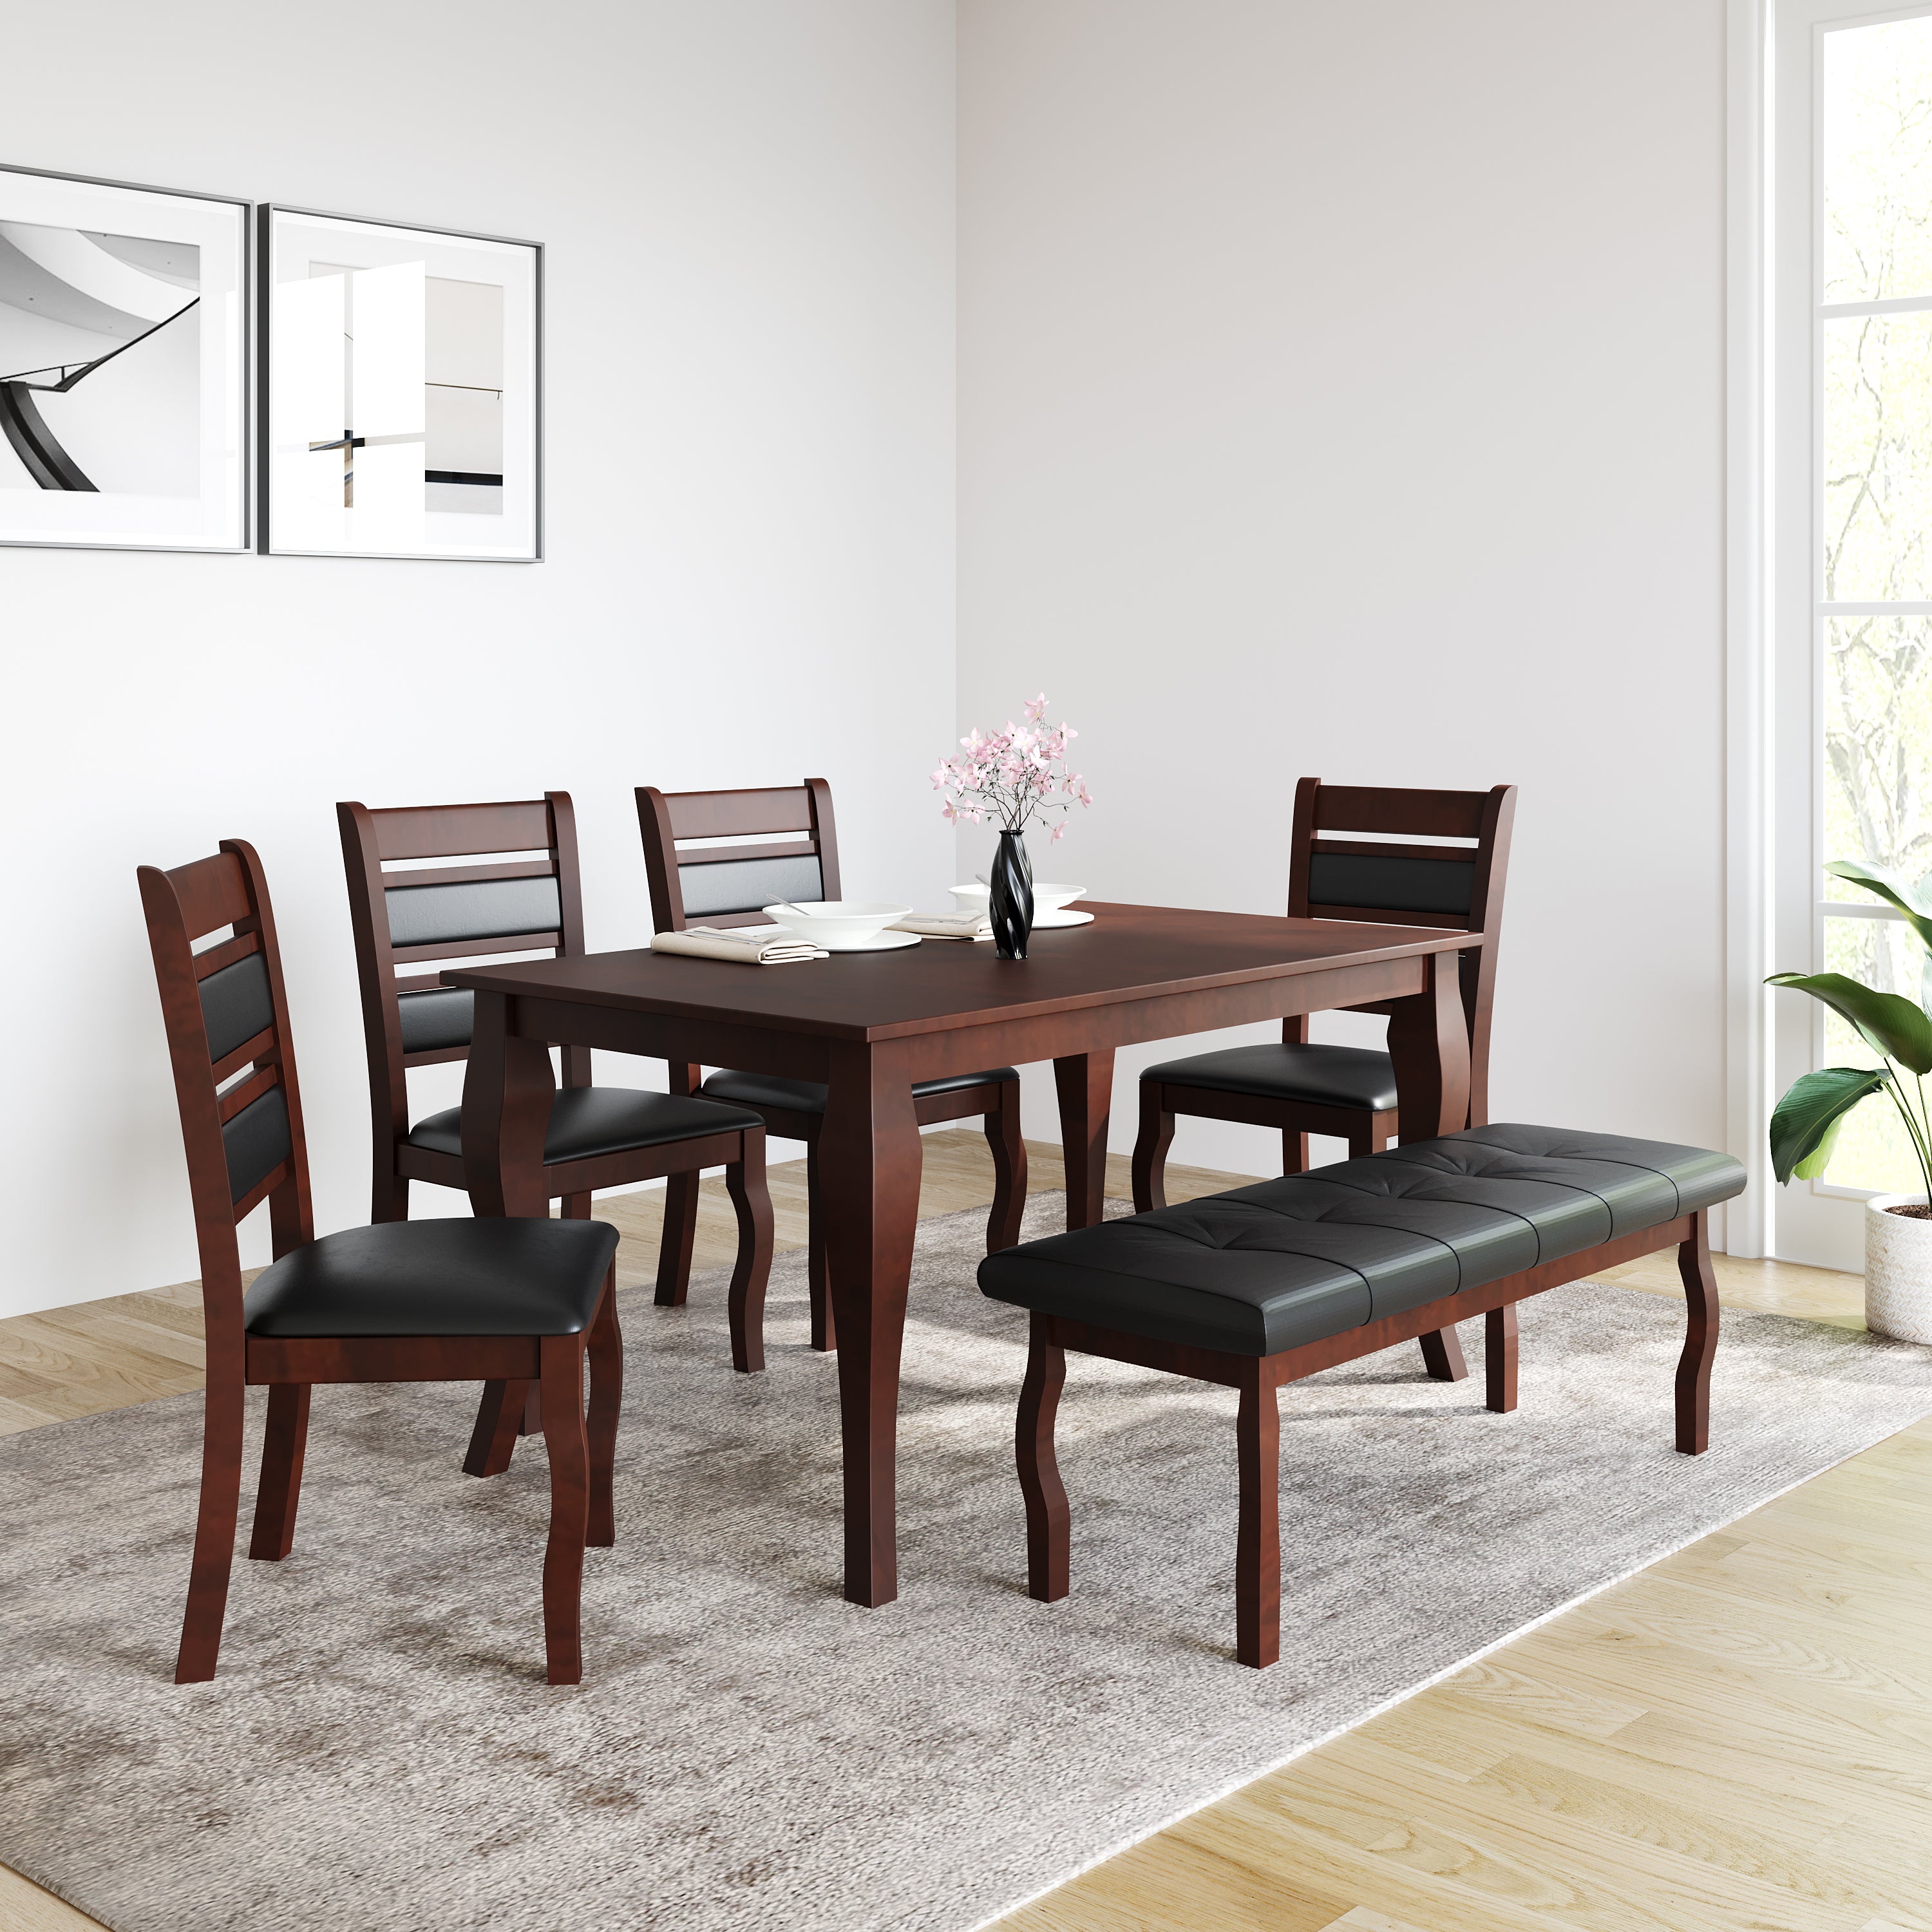 Larissa 6 Seater Dining Set With Bench (Coffee)